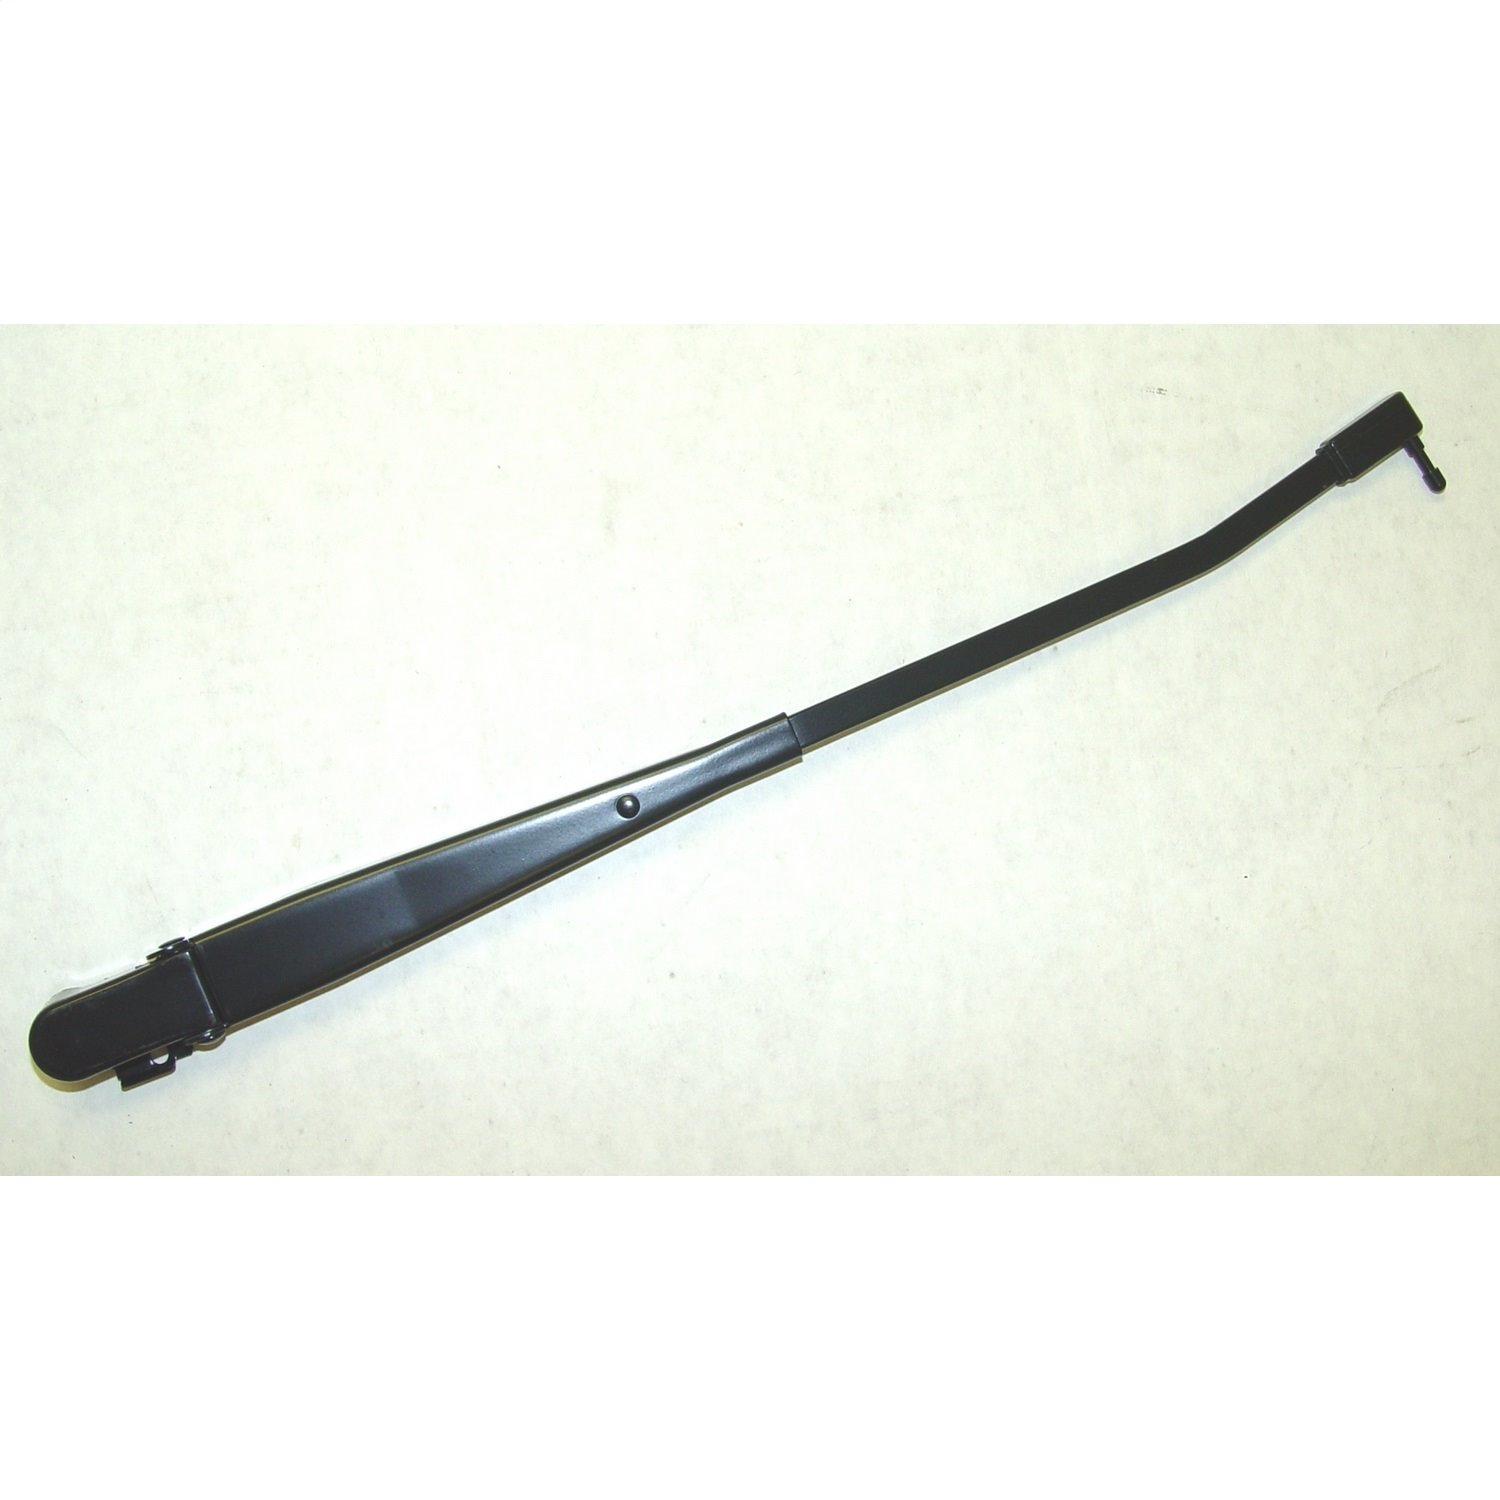 Replacement front windshield wiper arm from Omix-ADA, Fits left or right side., Fits 84-96 Jeep Cherokee XJ